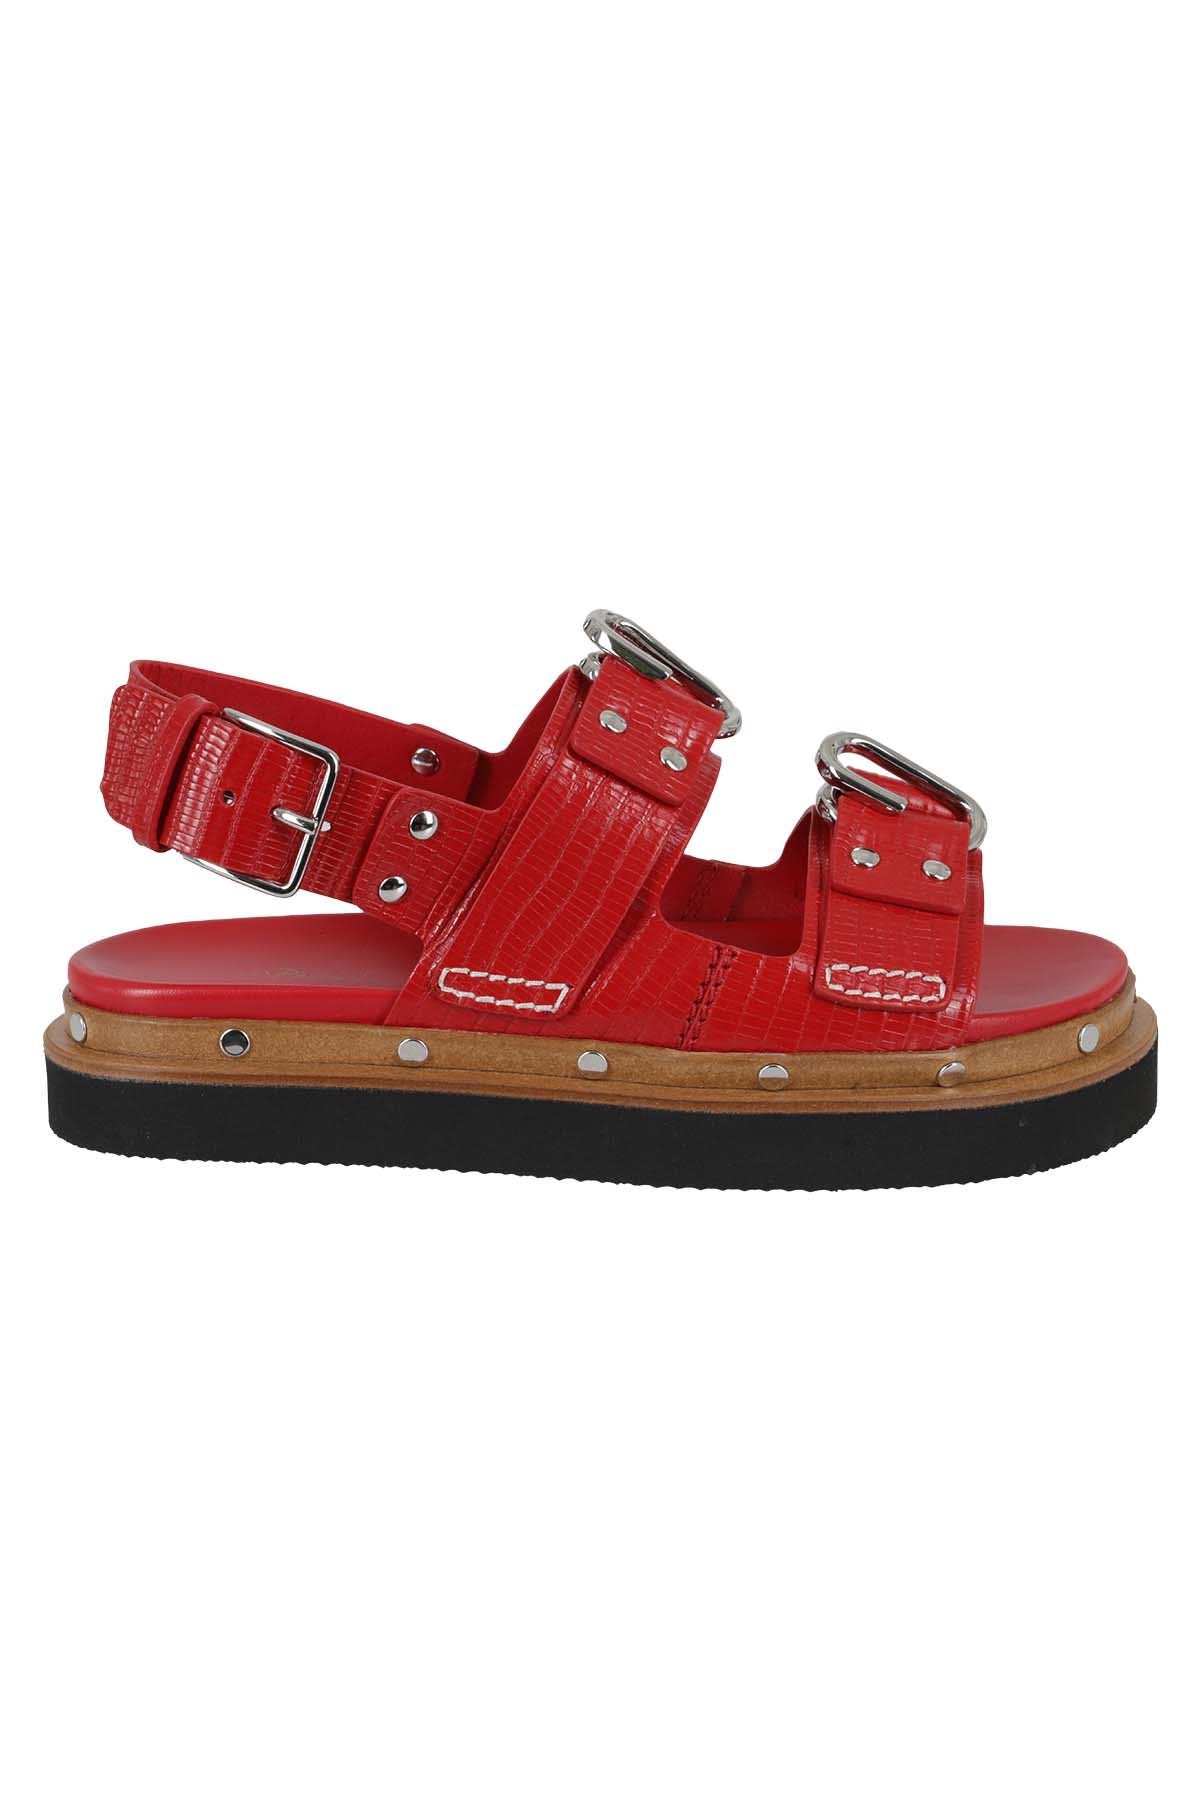 Buy 3.1 Phillip Lim Sandals online, shop 3.1 Phillip Lim shoes with free shipping